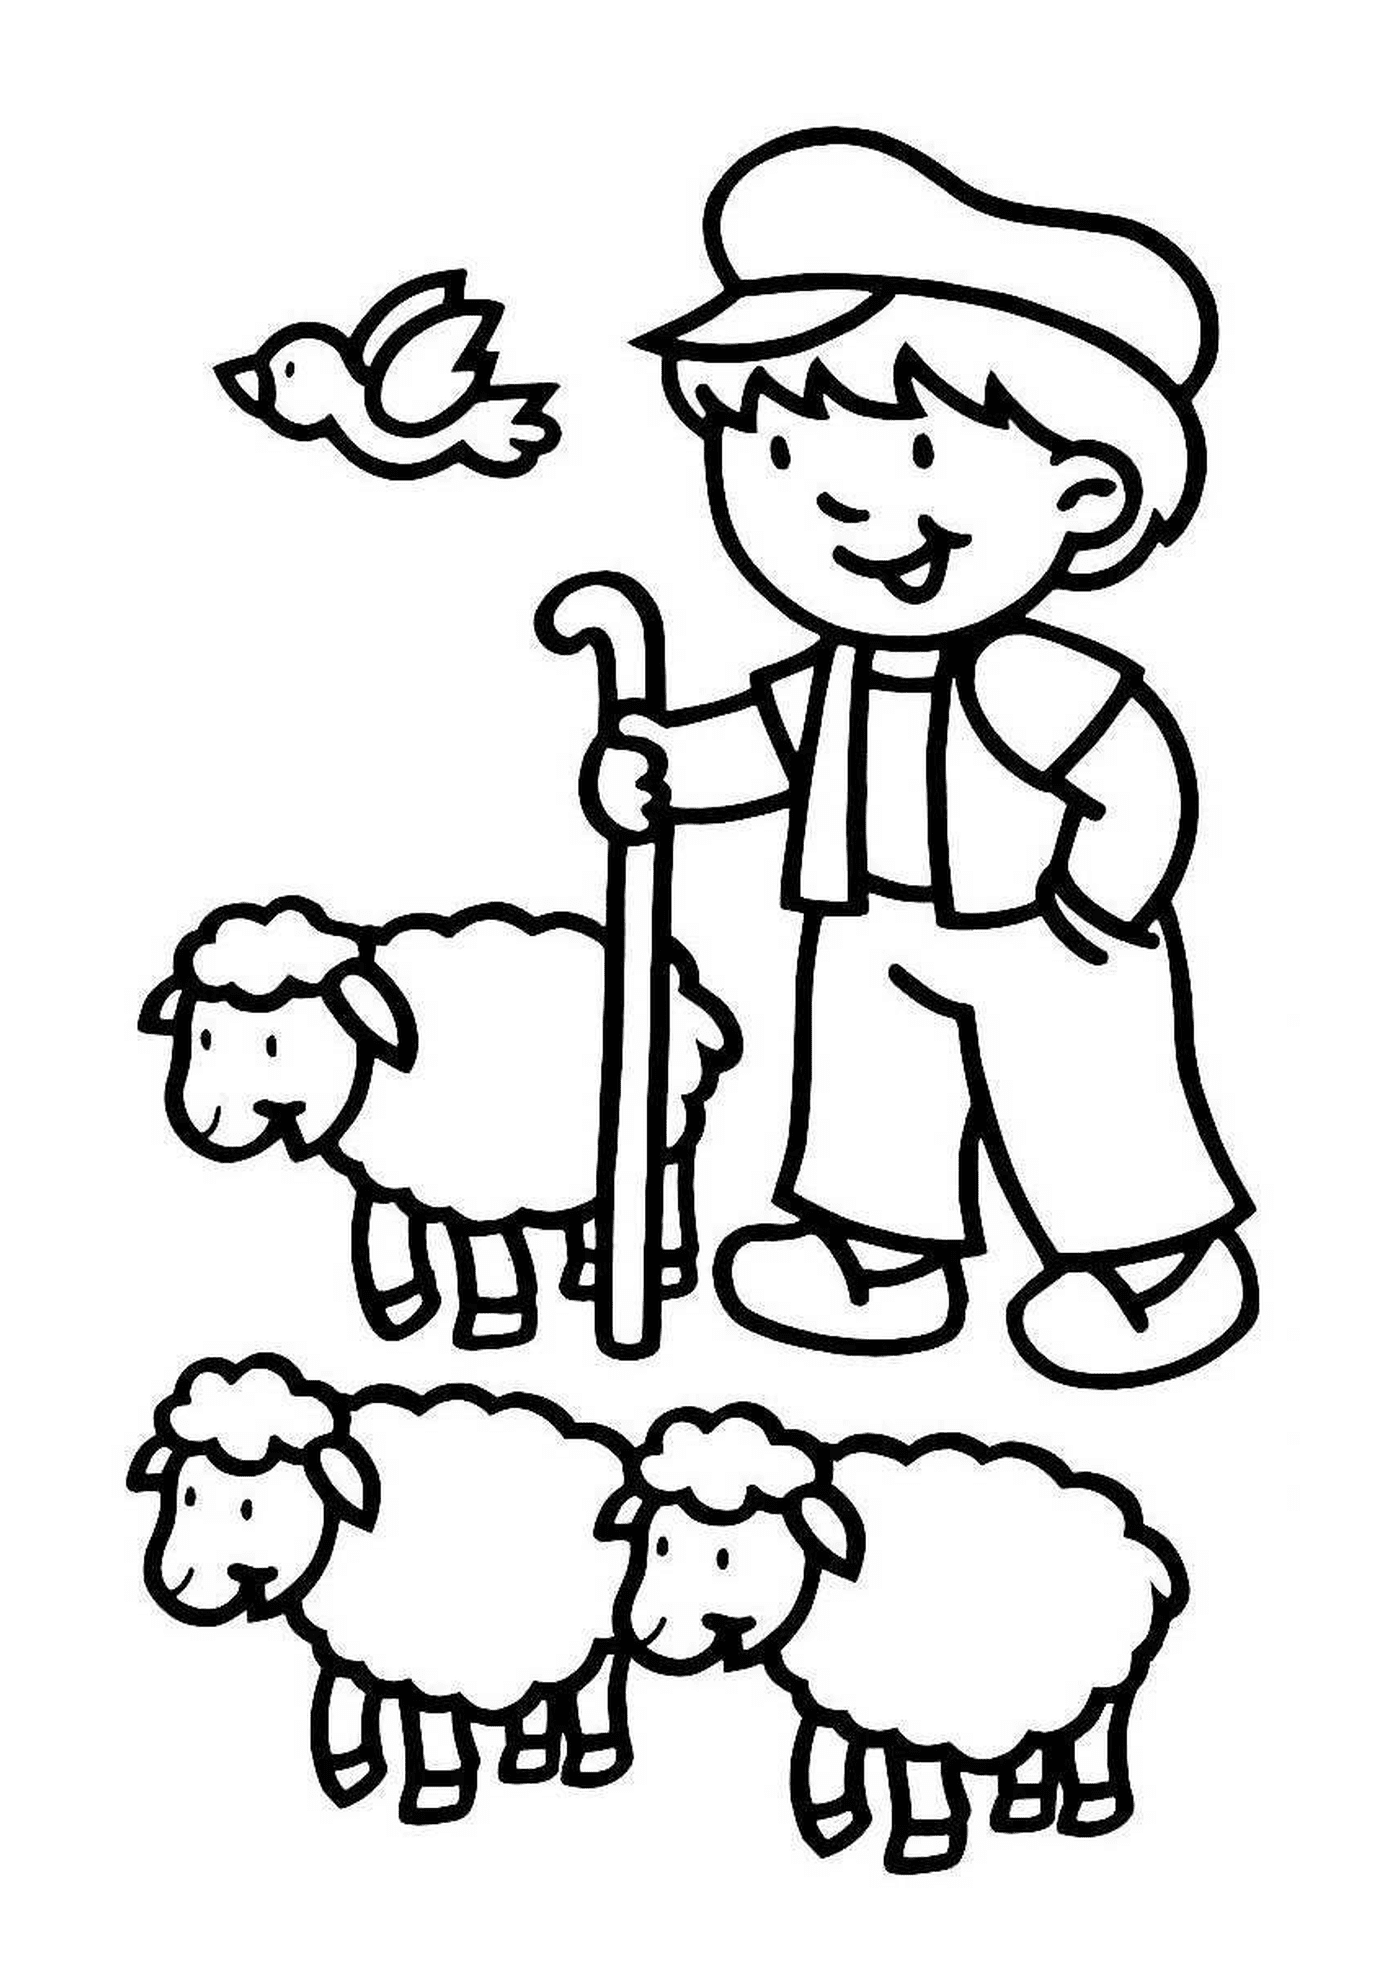  Farmer surrounded by many sheep 